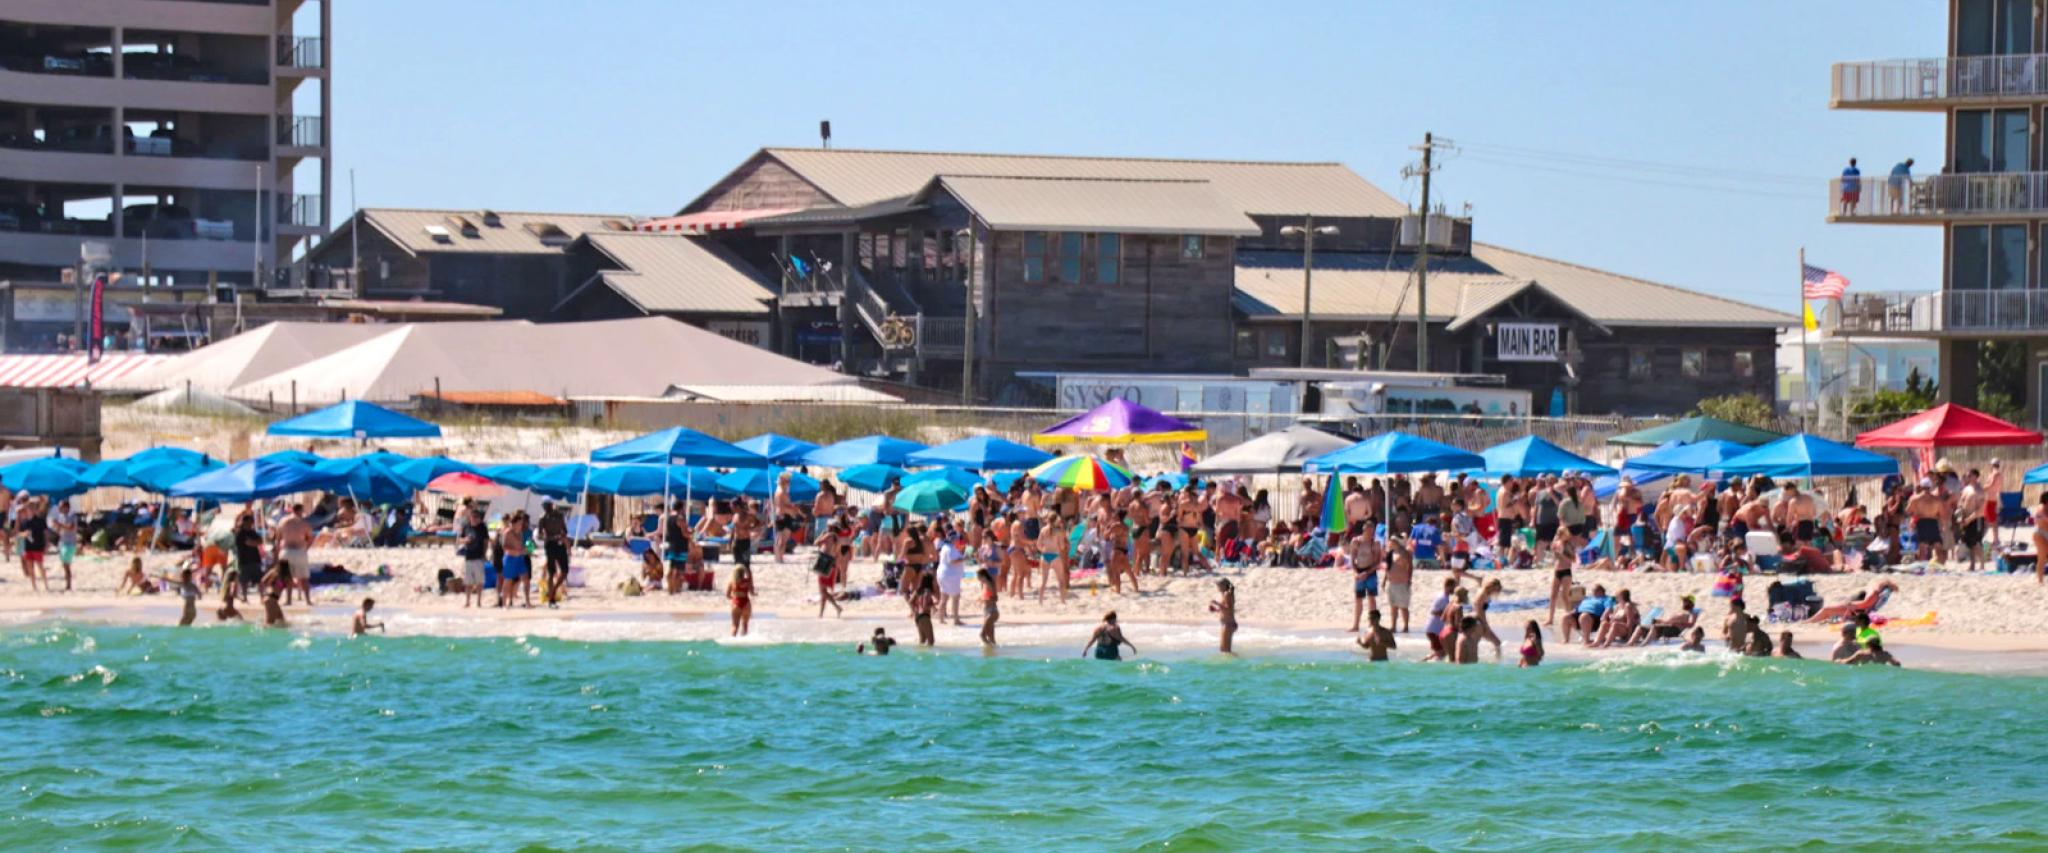 Throw a Few Fish at the 2020 Mullet Toss and Beach Party Gulf Shores